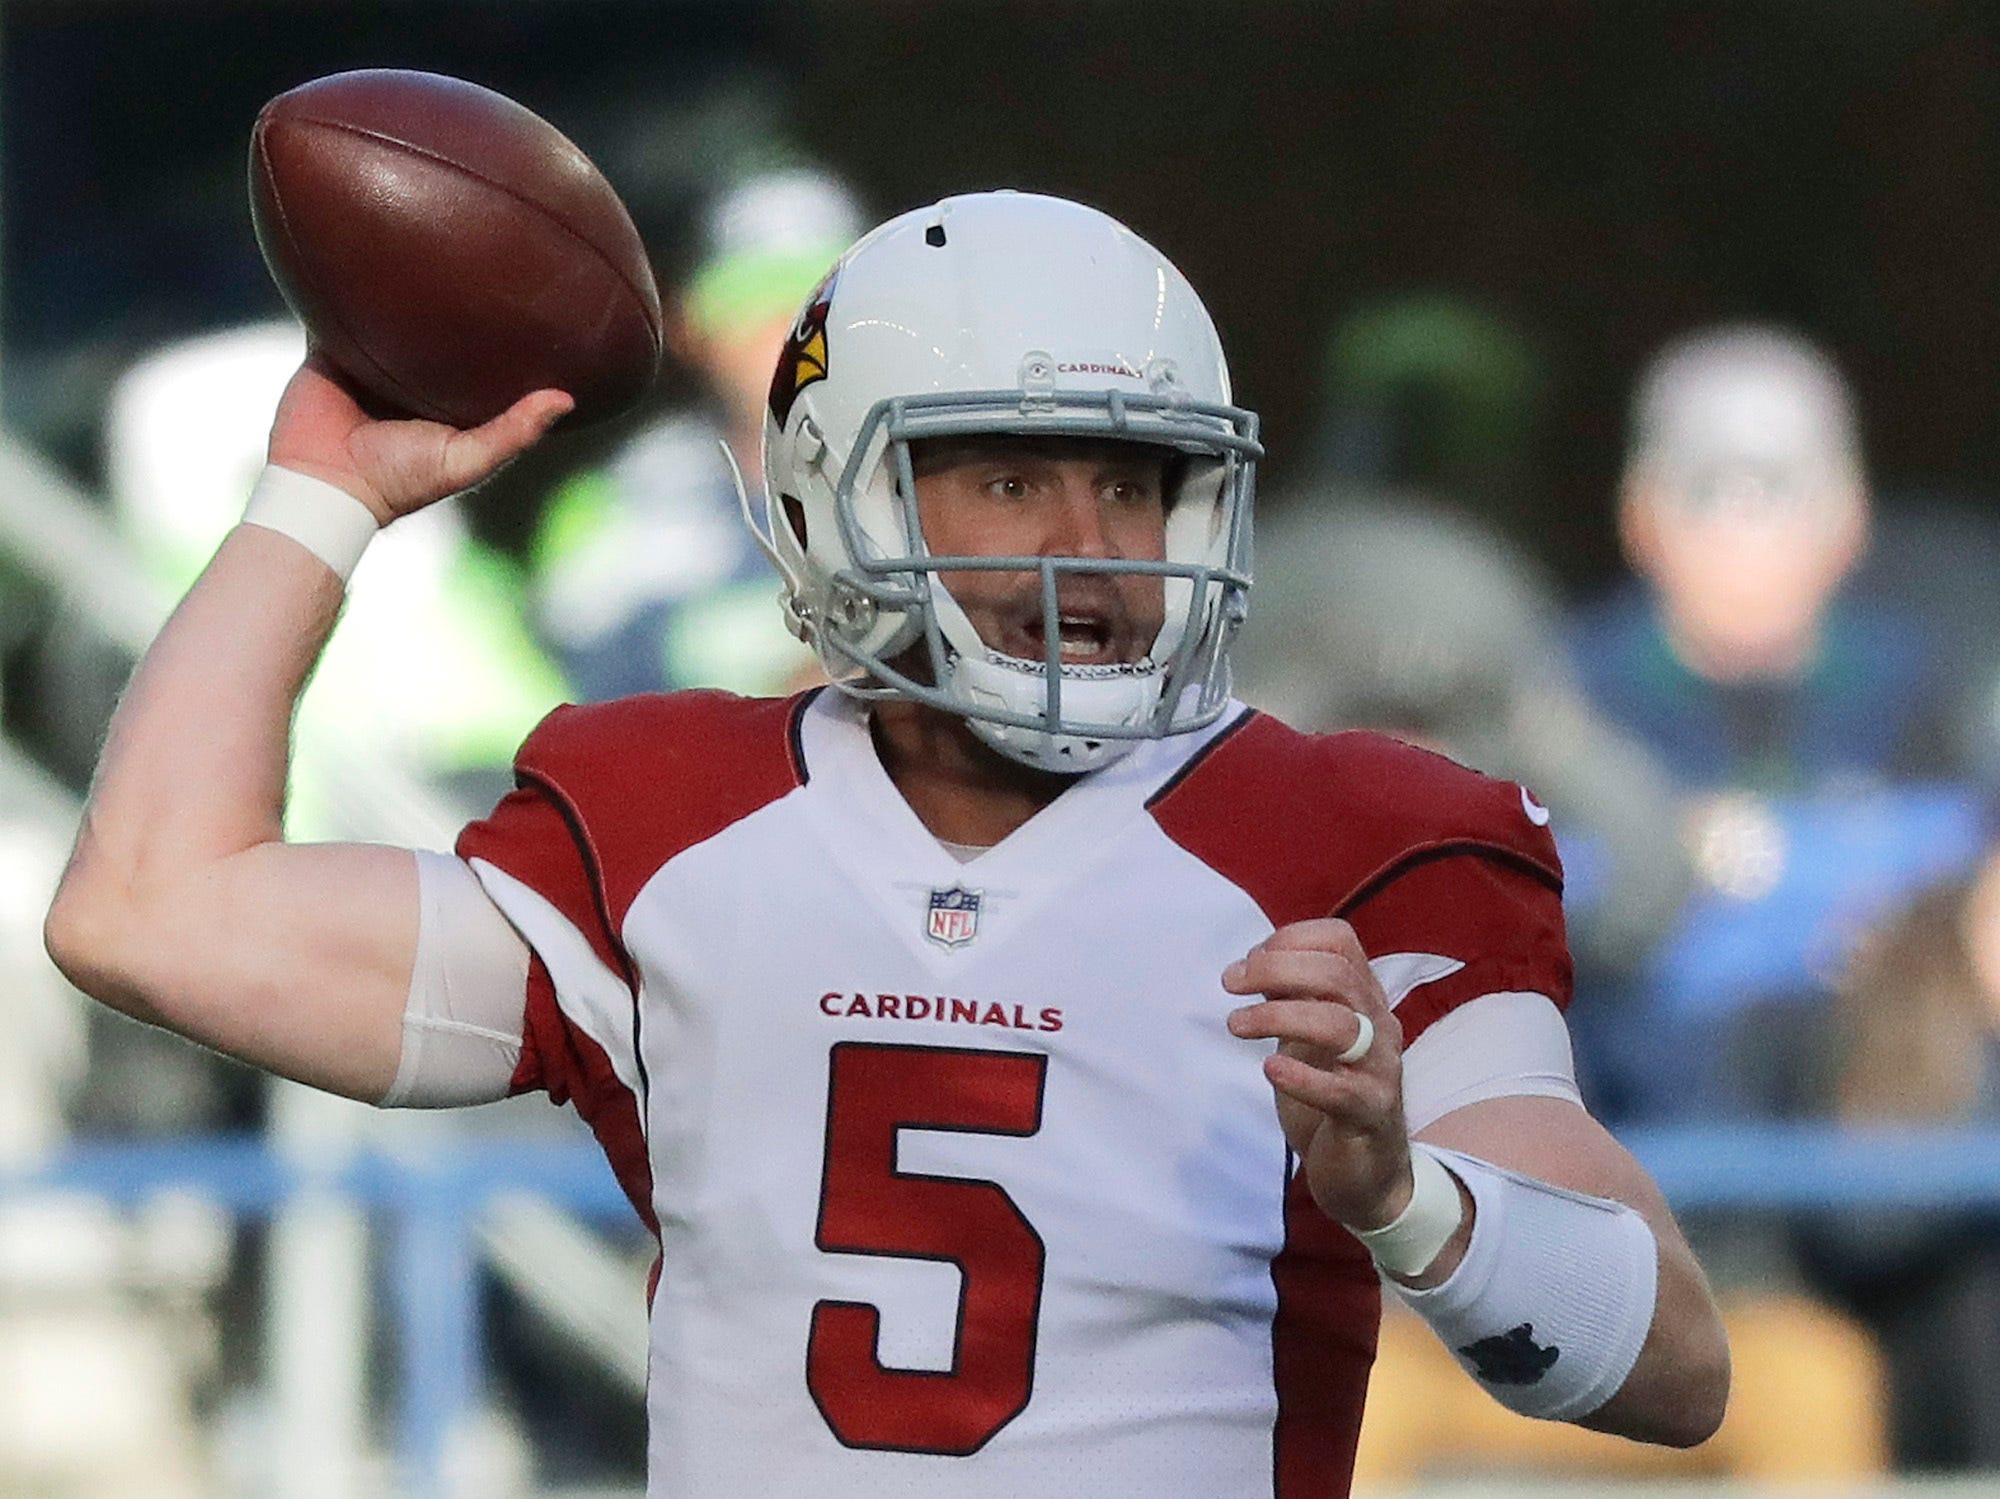 Browns sign free agent QB Drew Stanton to 2-year contract